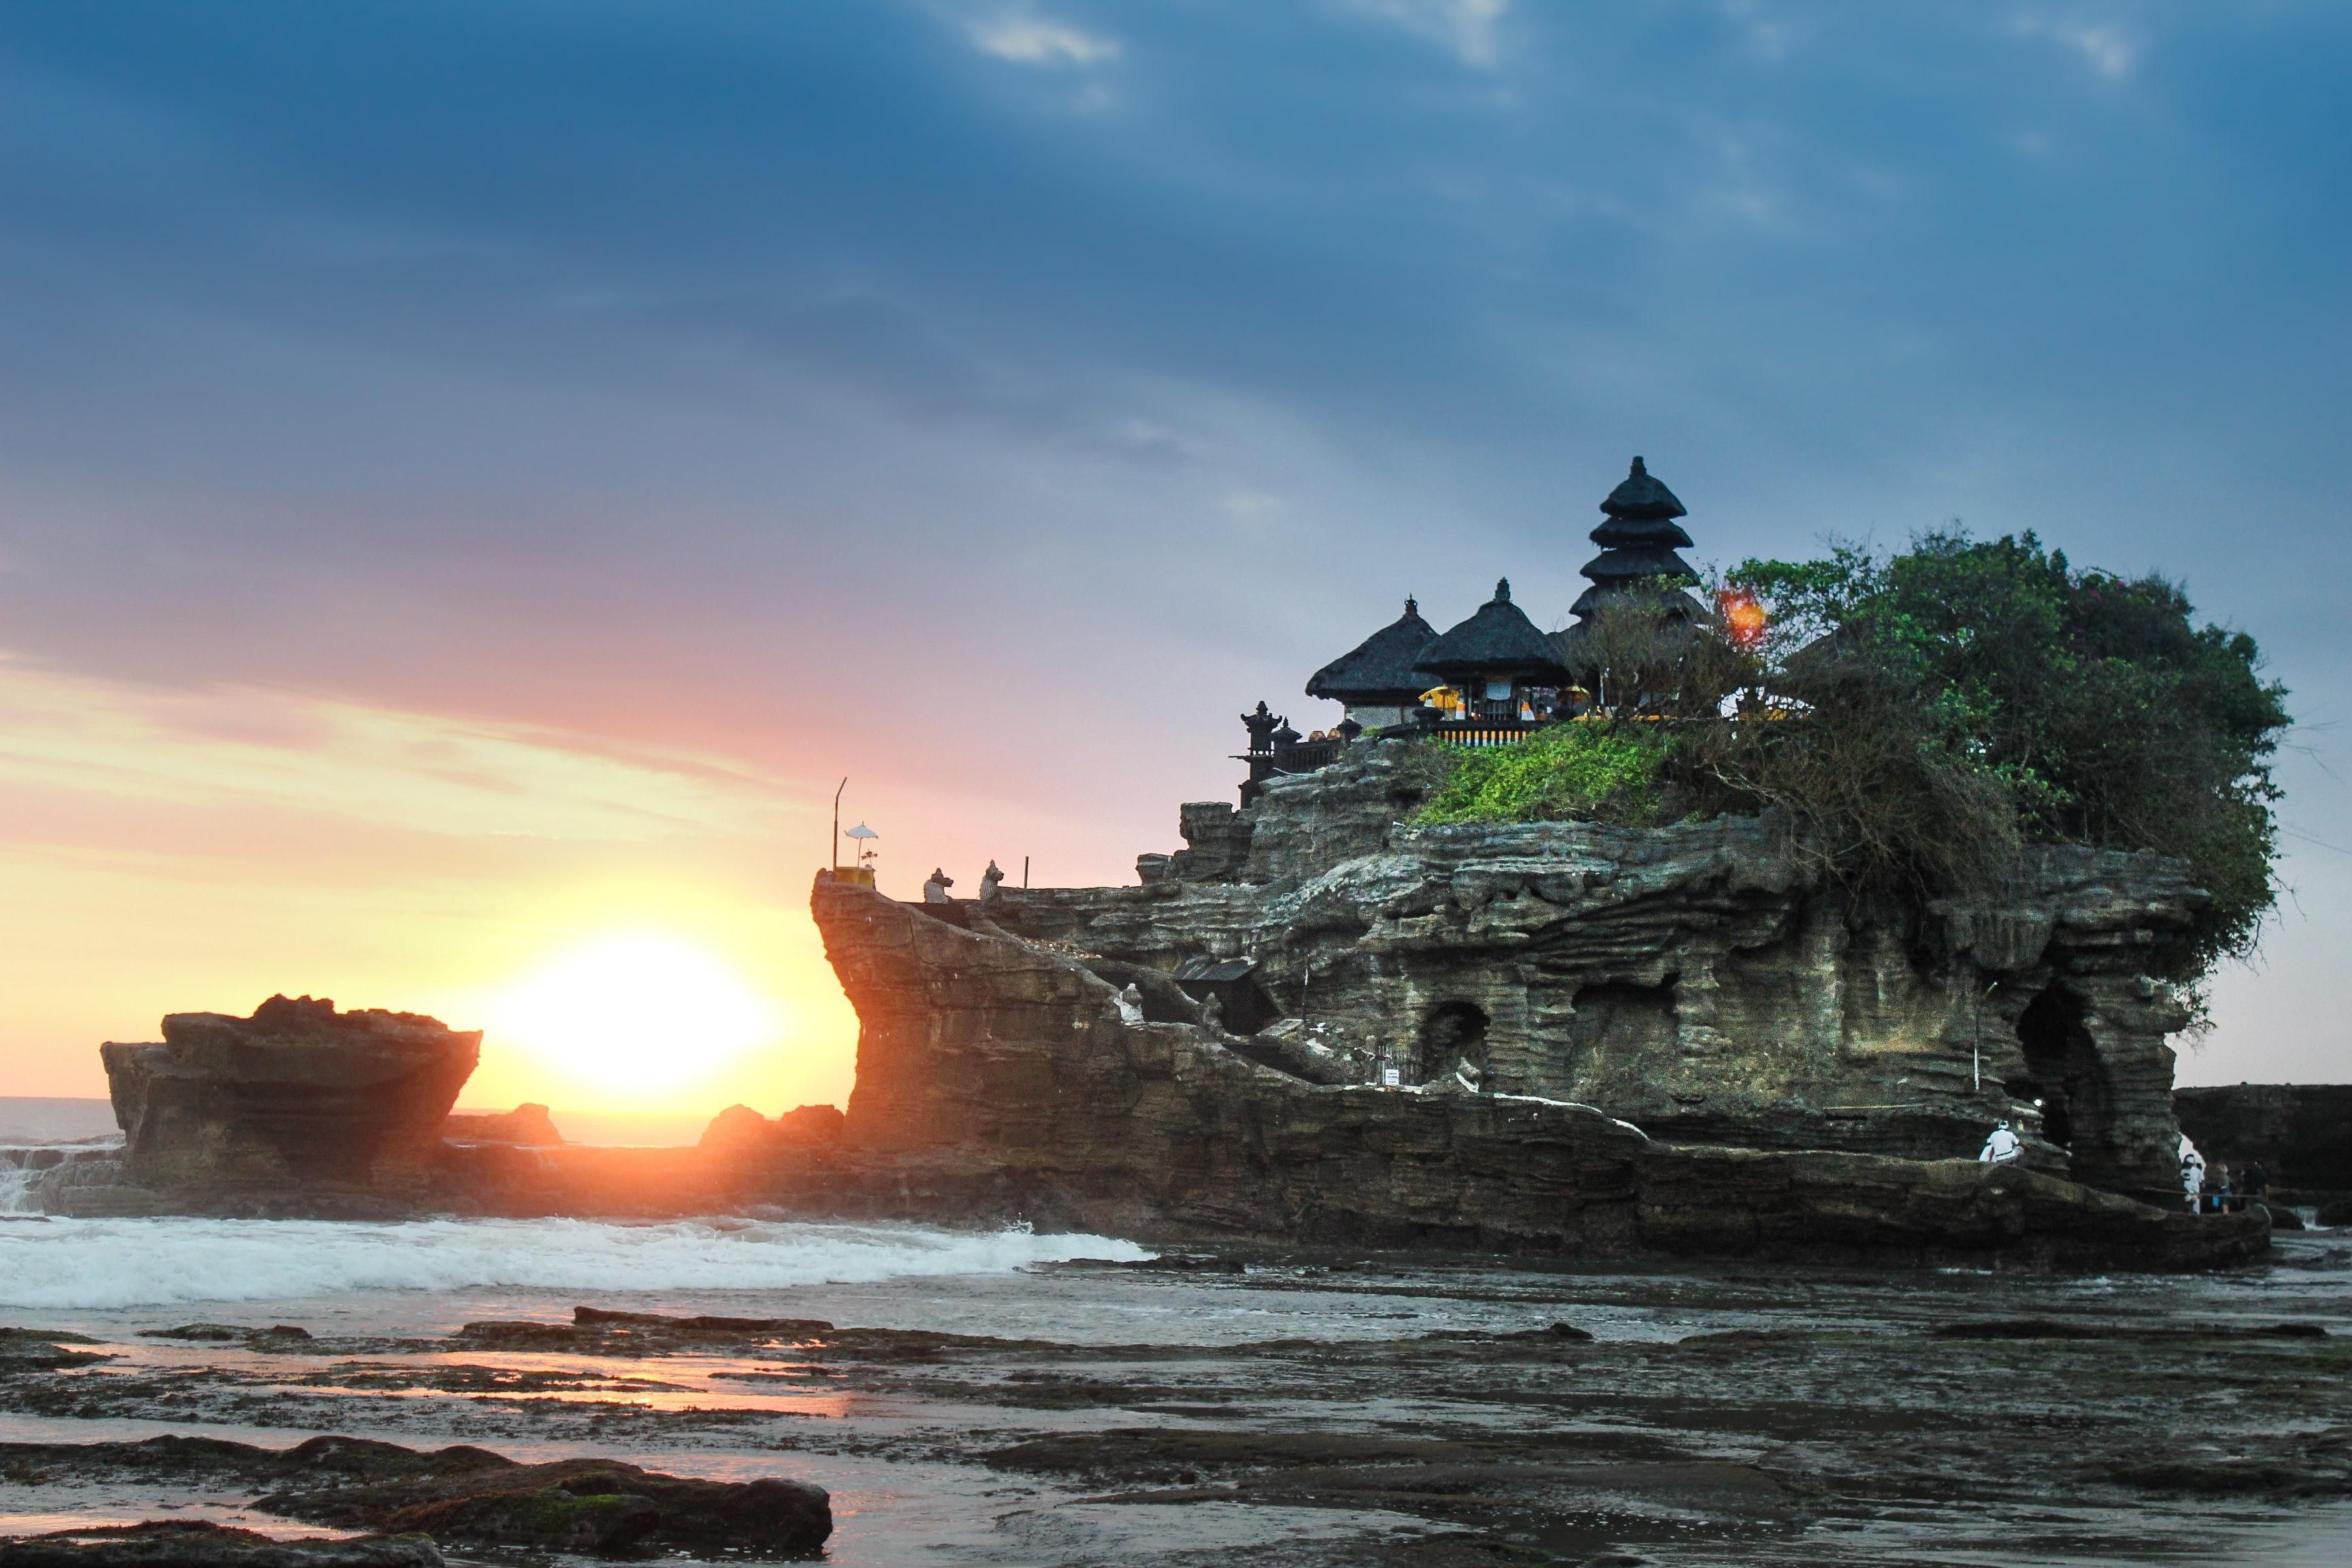 temple in Bali on gray rock hill with the sunset in the background.